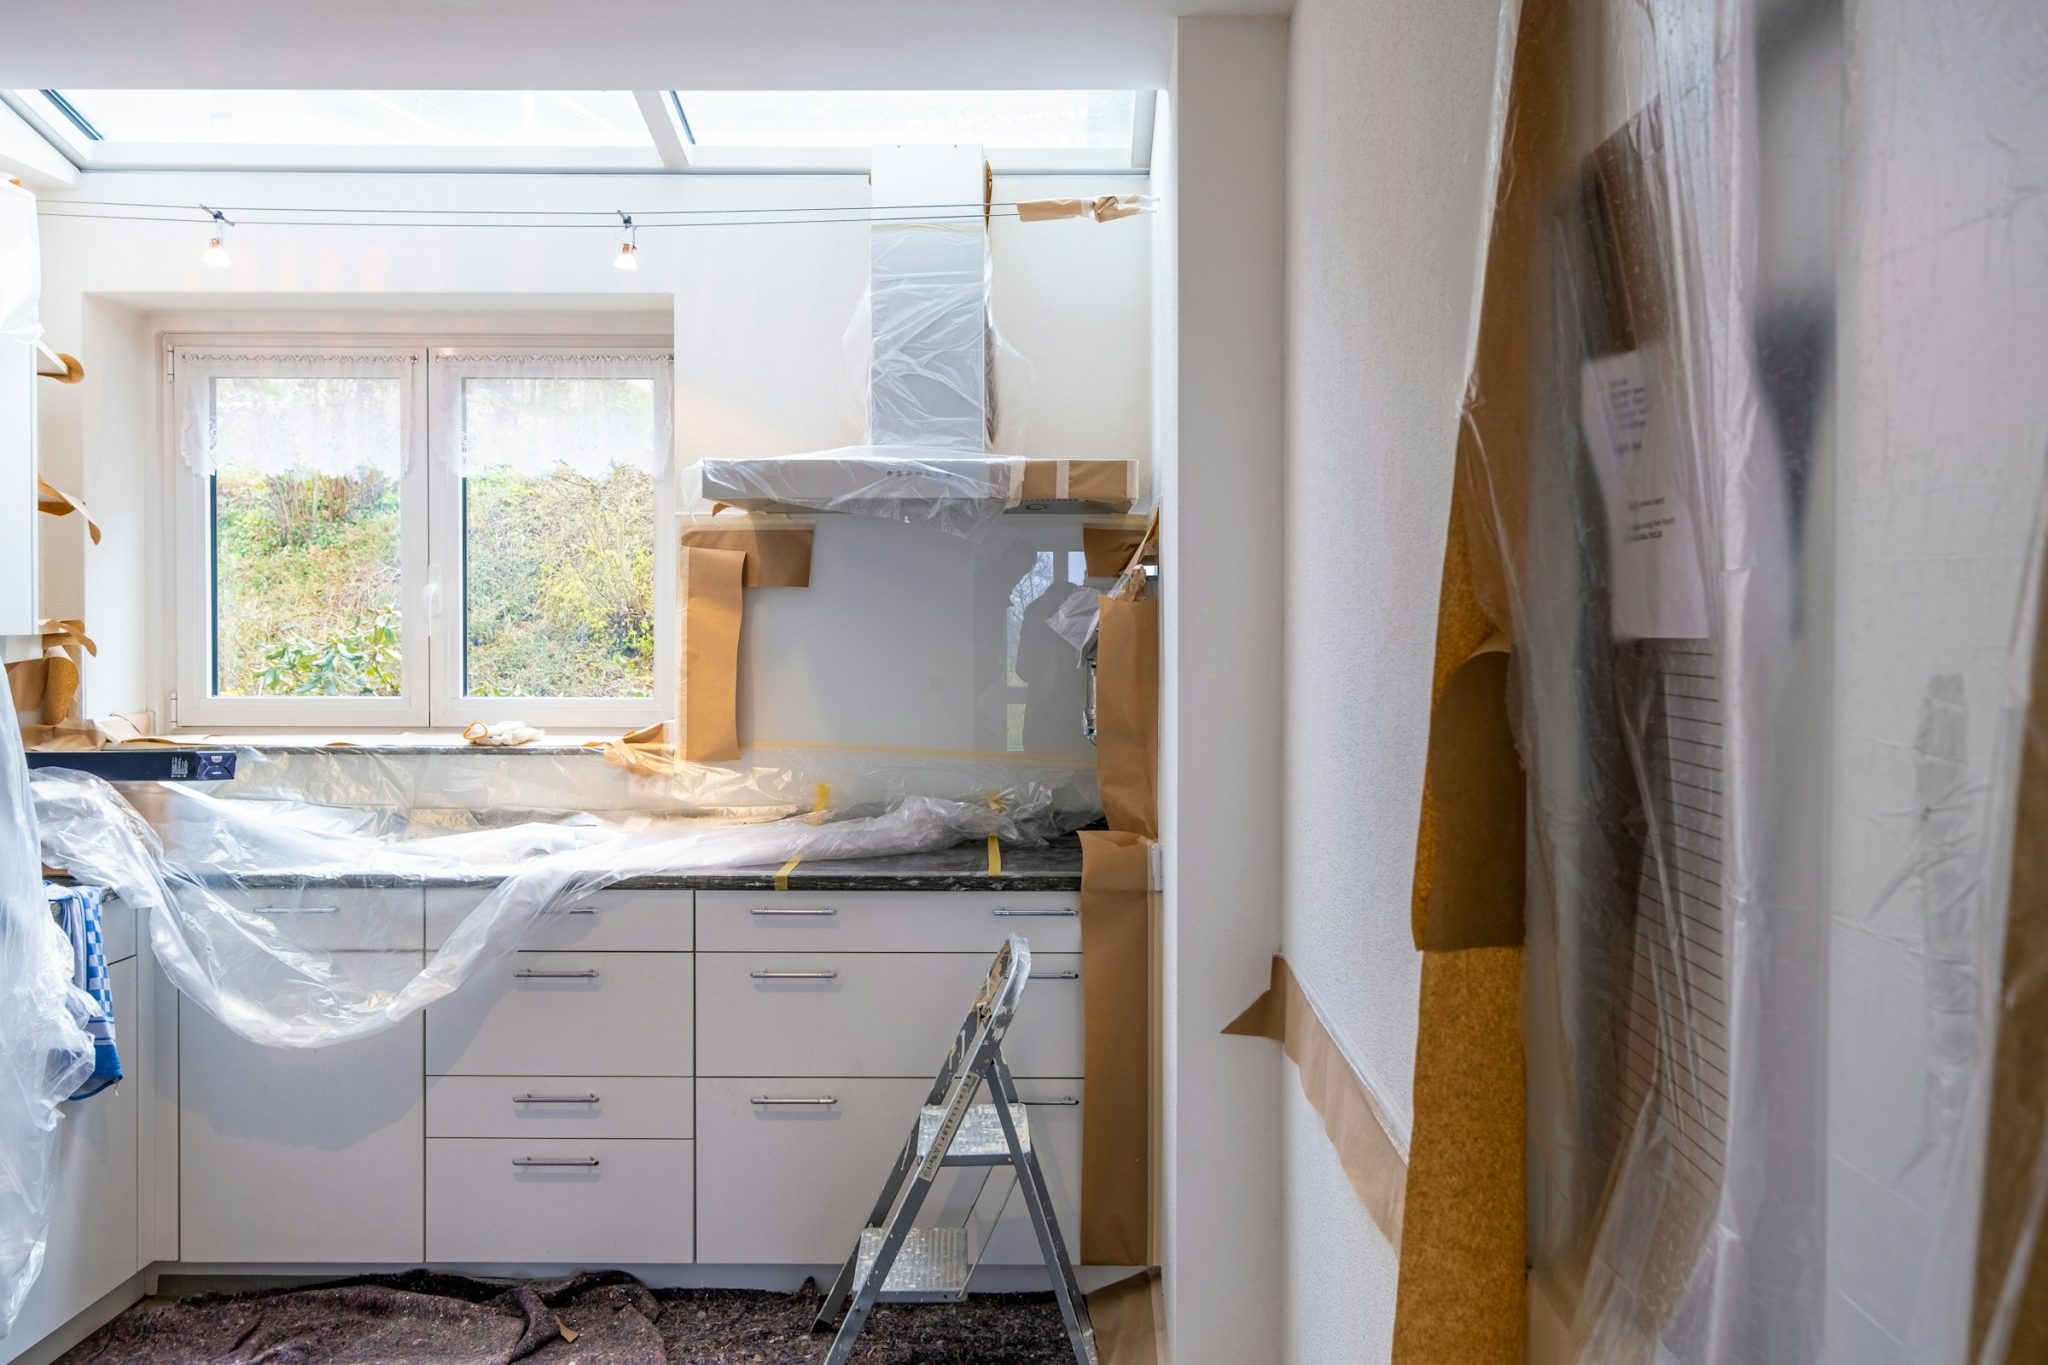 The dos and don'ts of home renovation: must-know tips